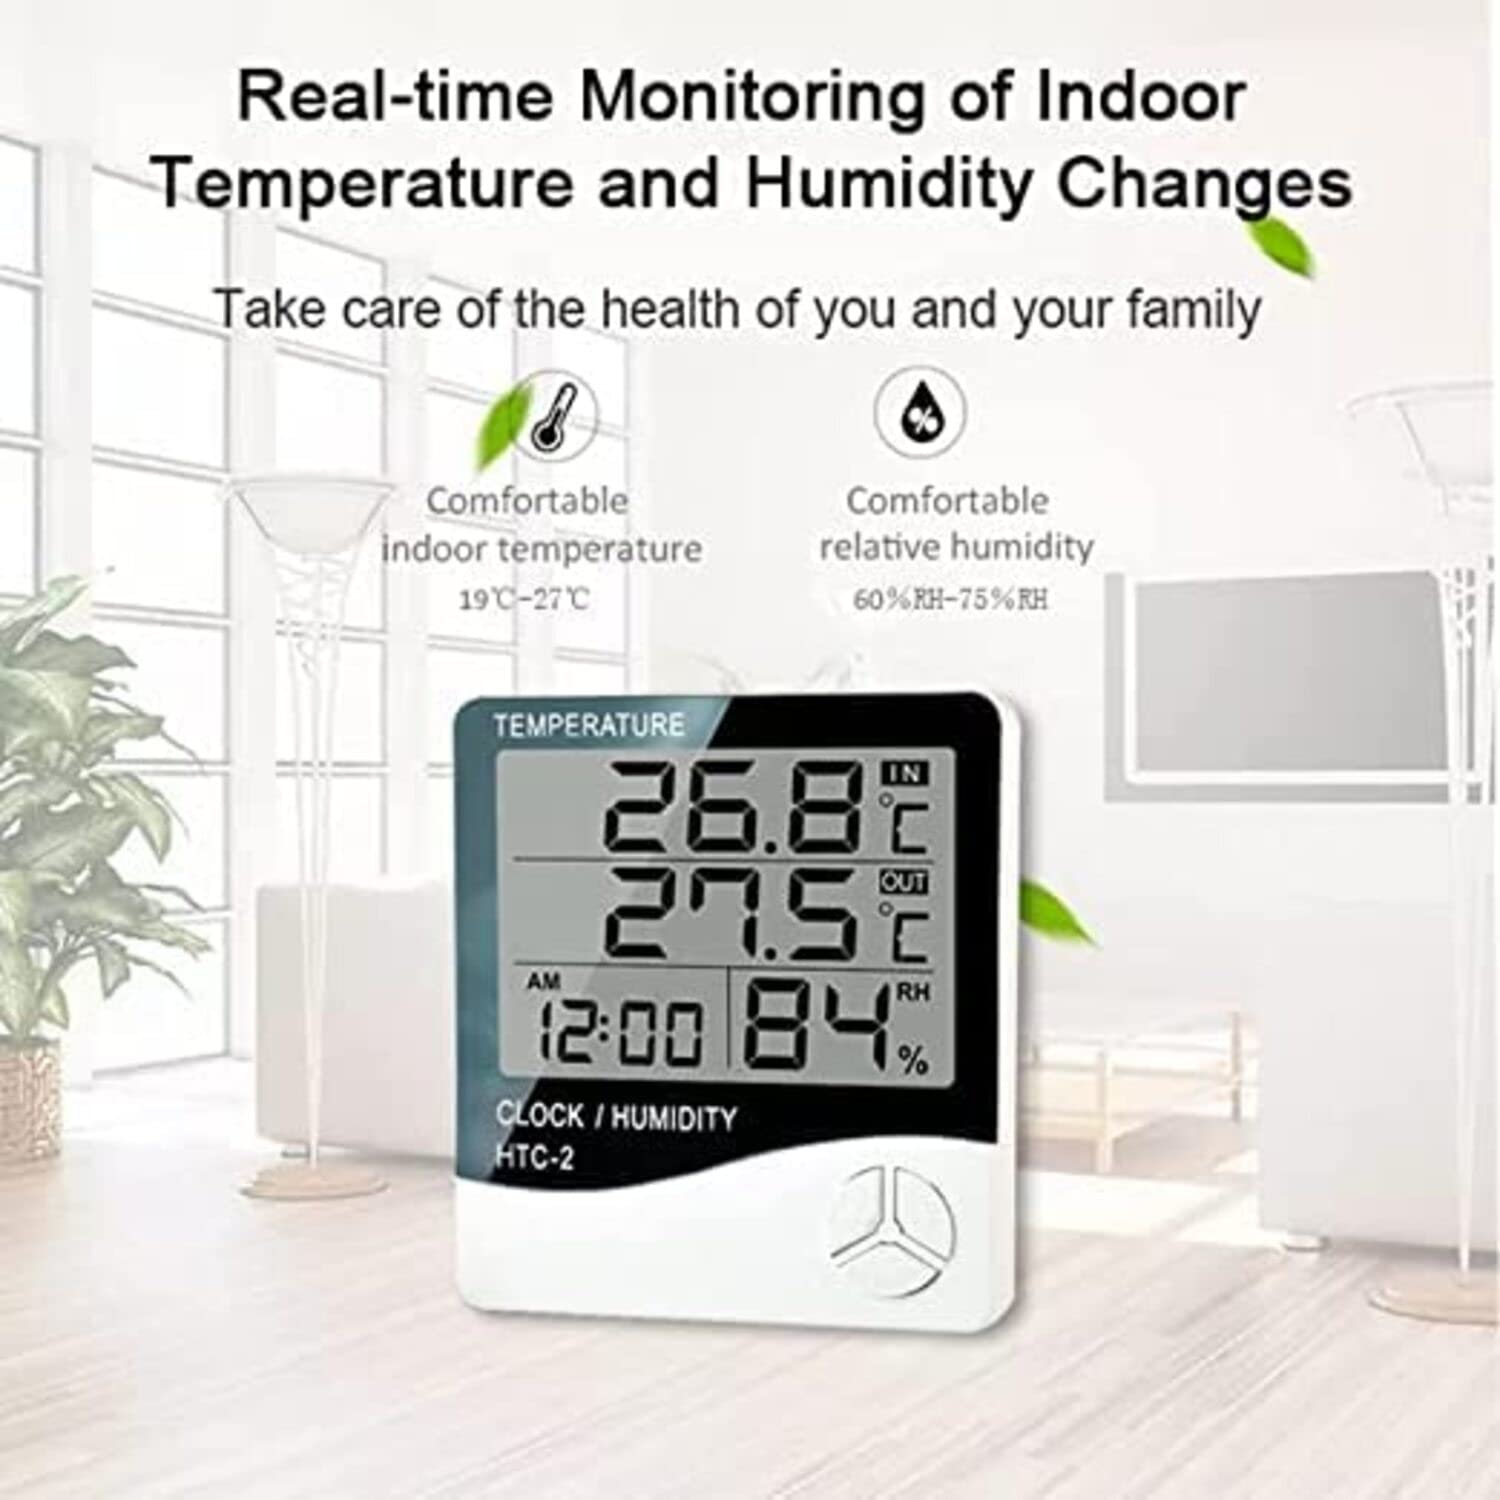 HTC-2 High Quality Room Indoor and Outdoor Electronic Temperature